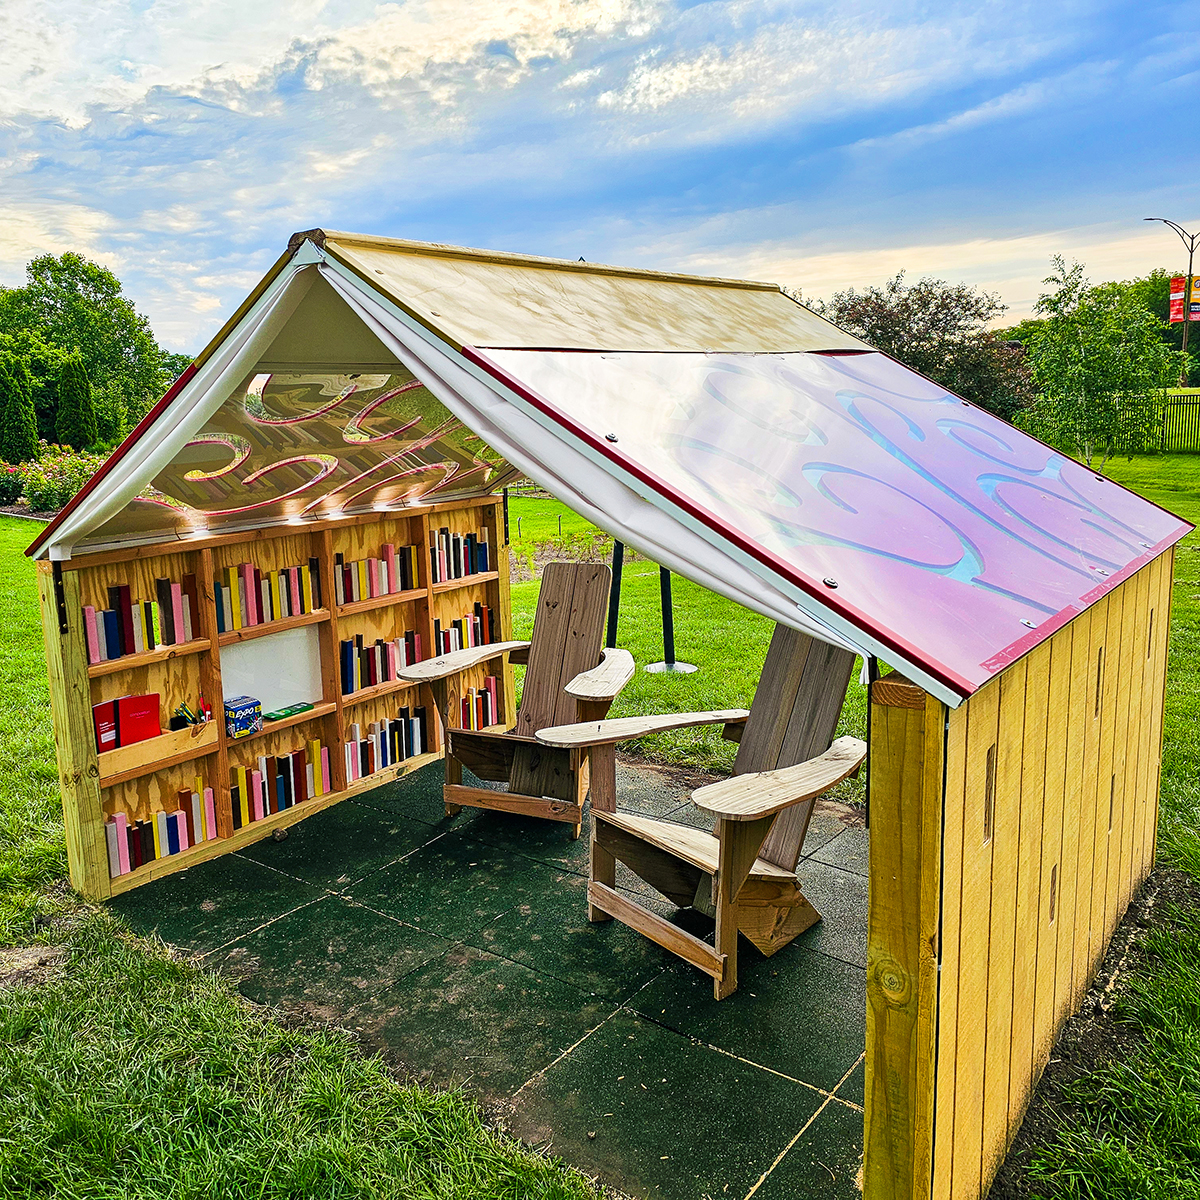 Playhouse with a book cover roof. Books and chairs inside.